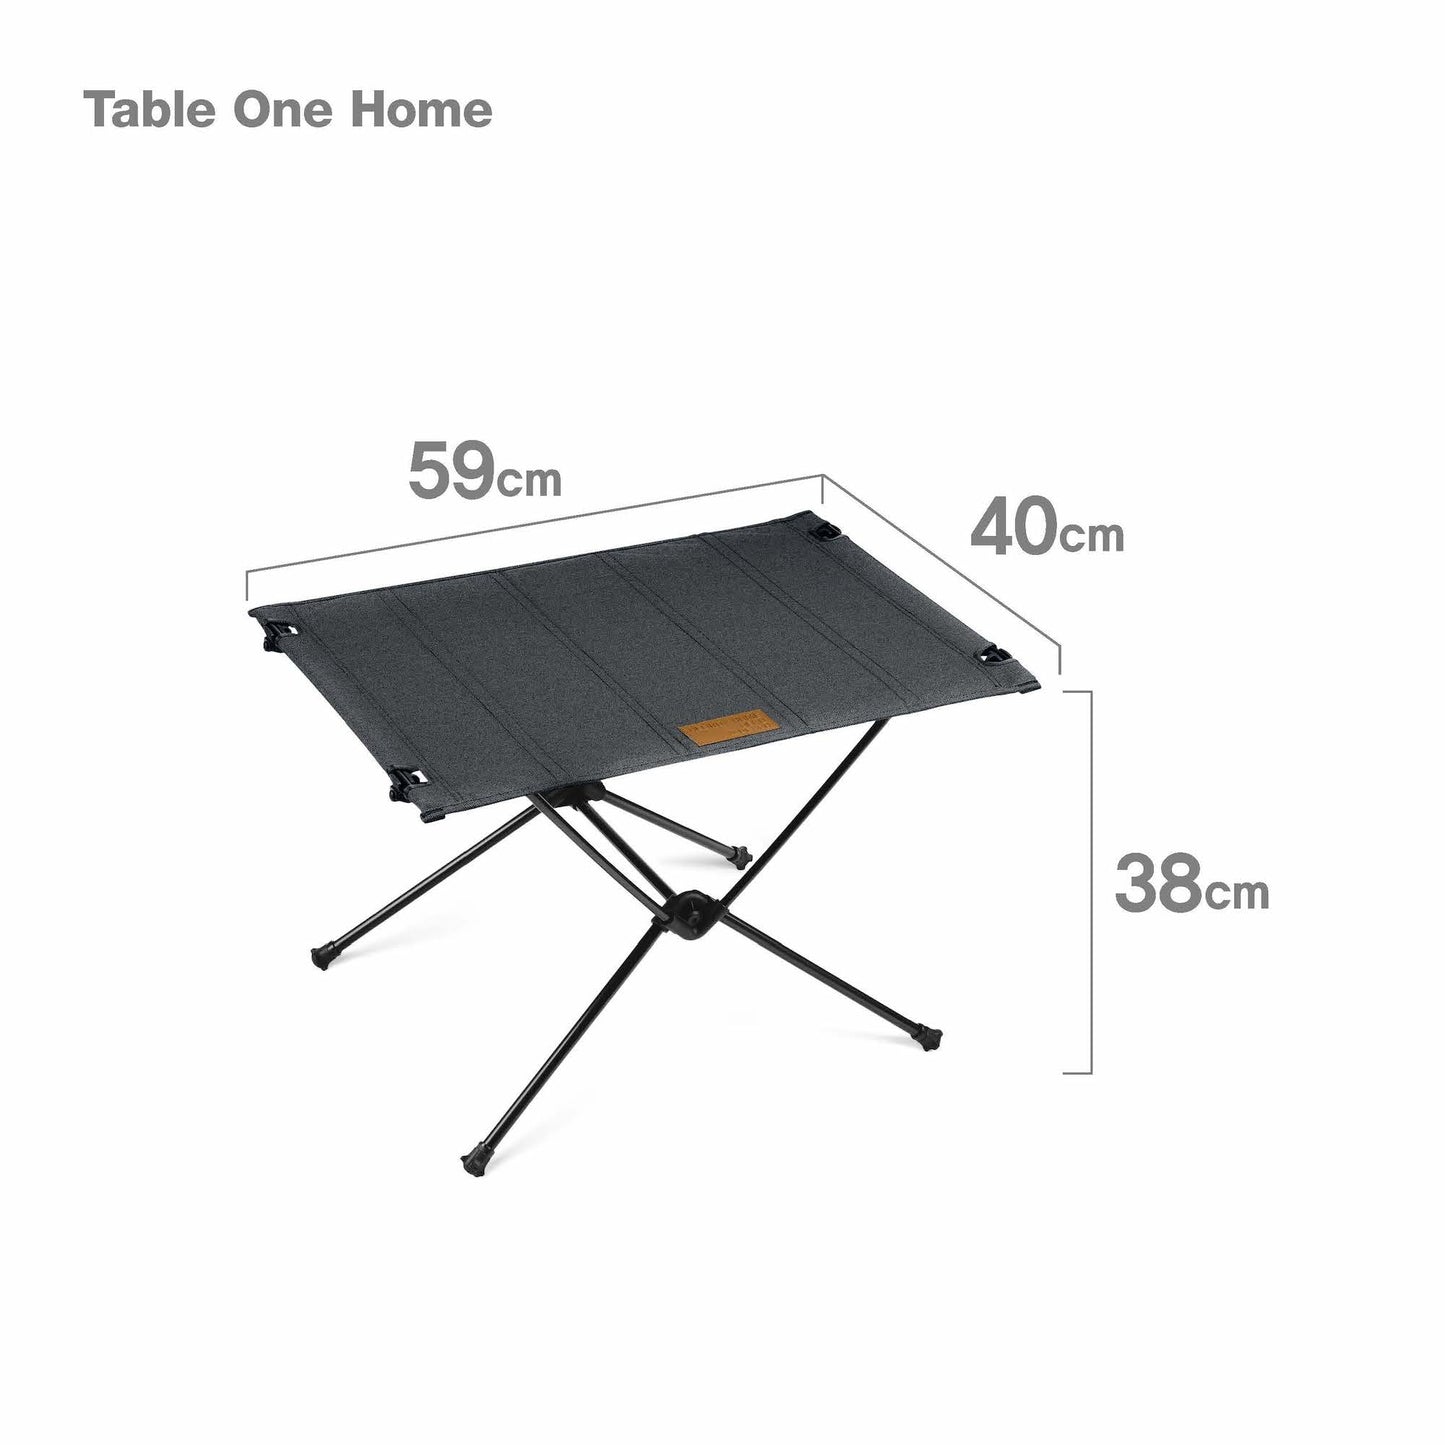 Table One Home - Black